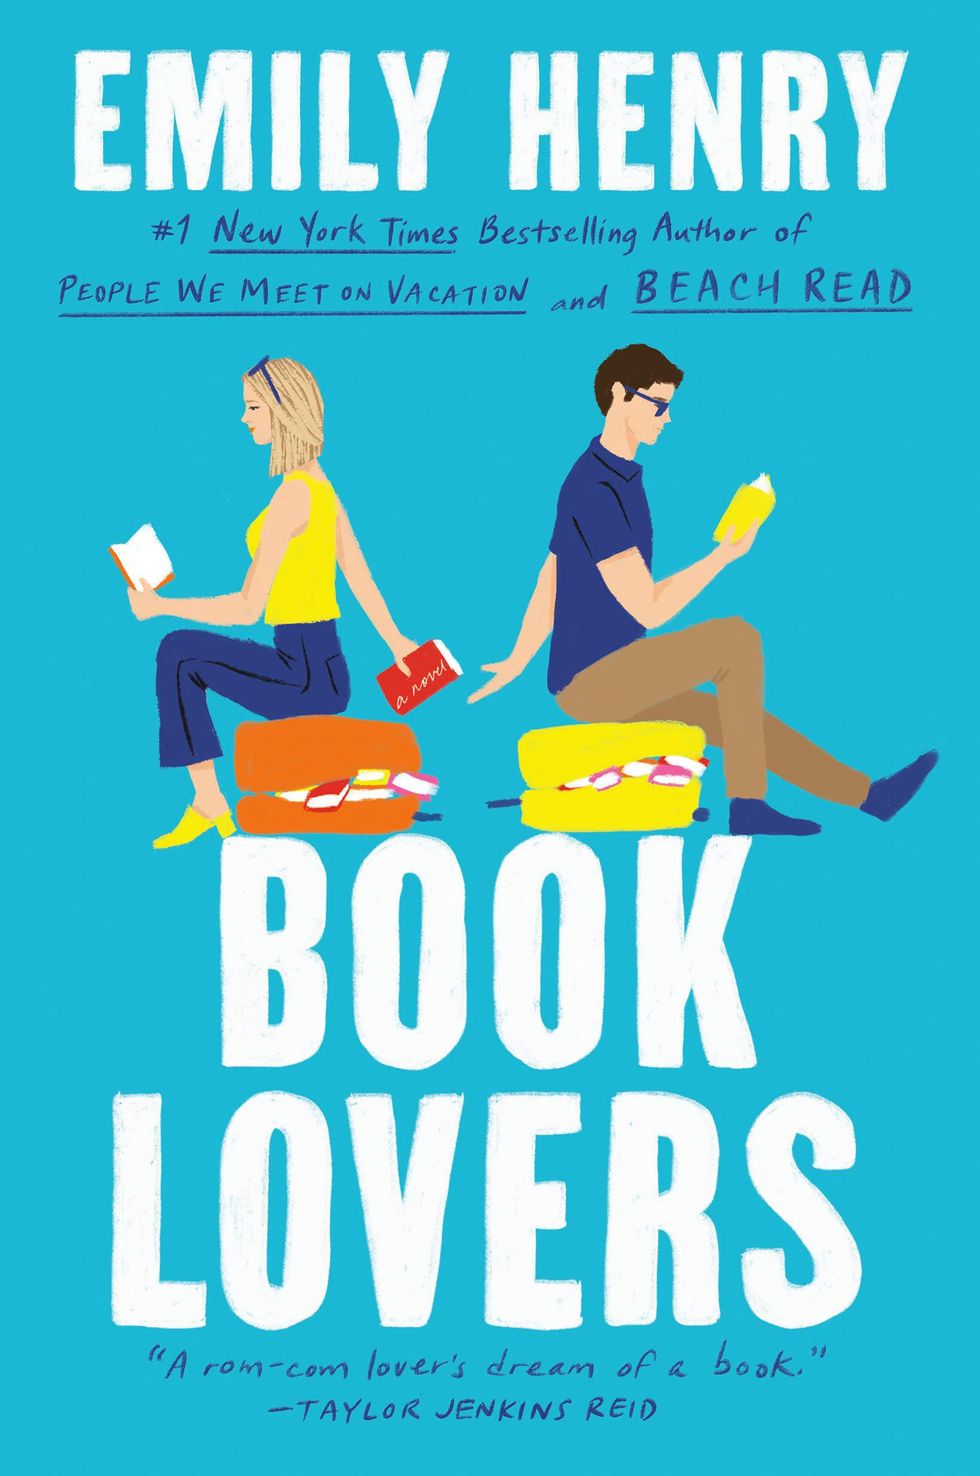 Book Lovers by Emily Henry Summer Books